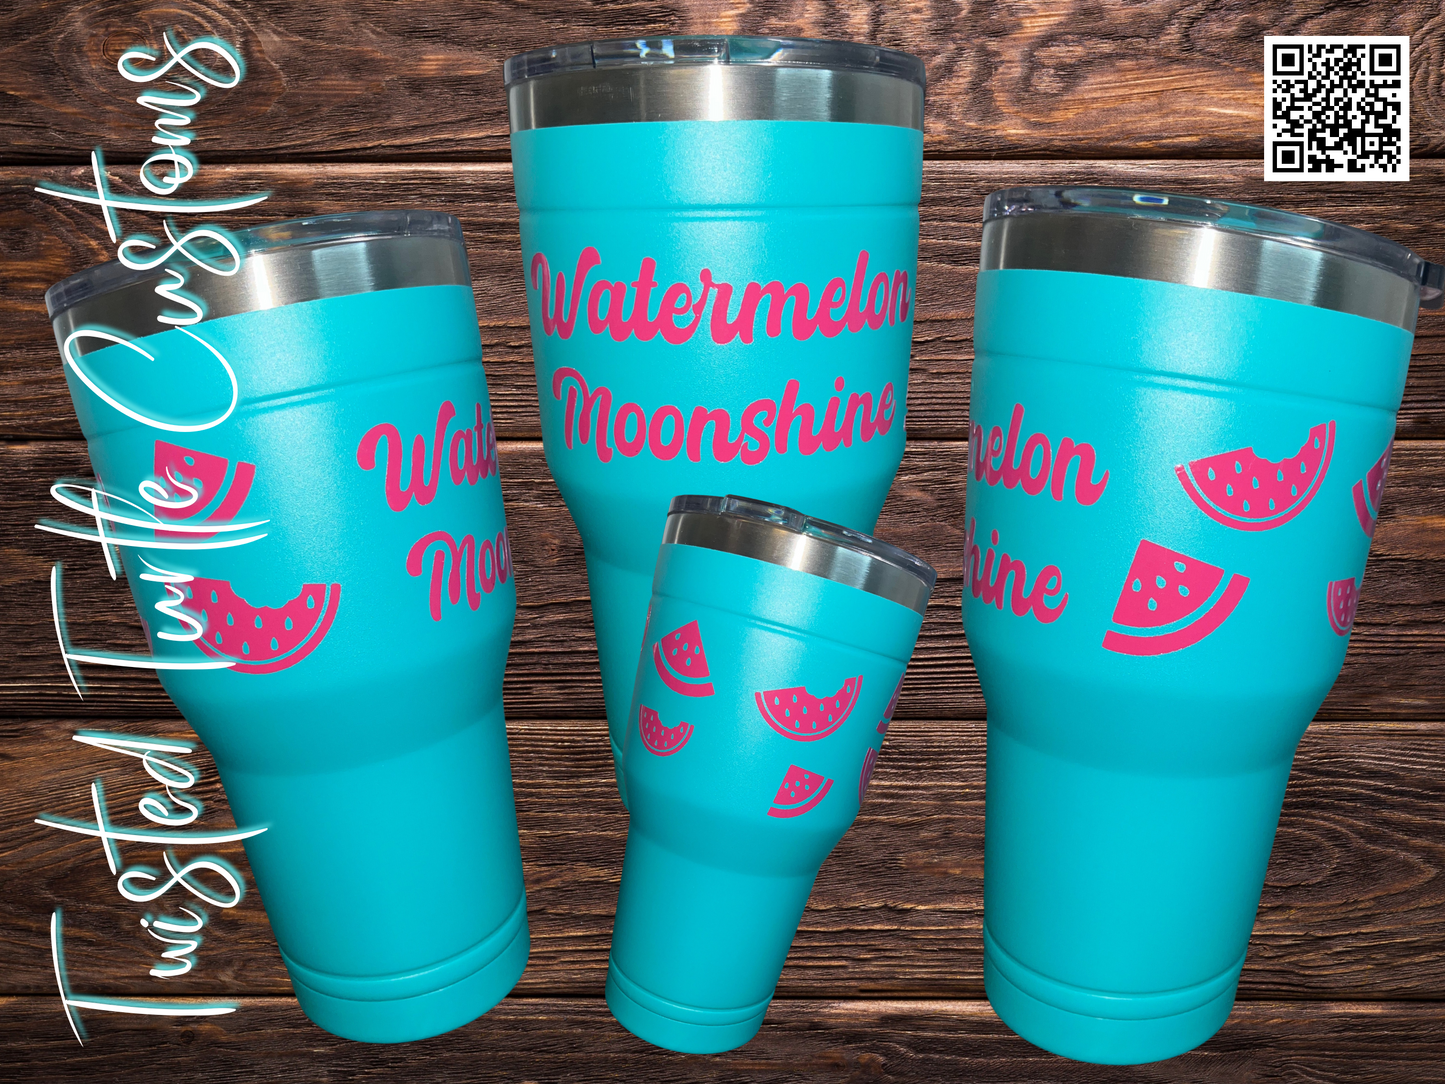 Watermelon Moonshine Teal and Hot Pink 30oz Tumbler with plastic lid